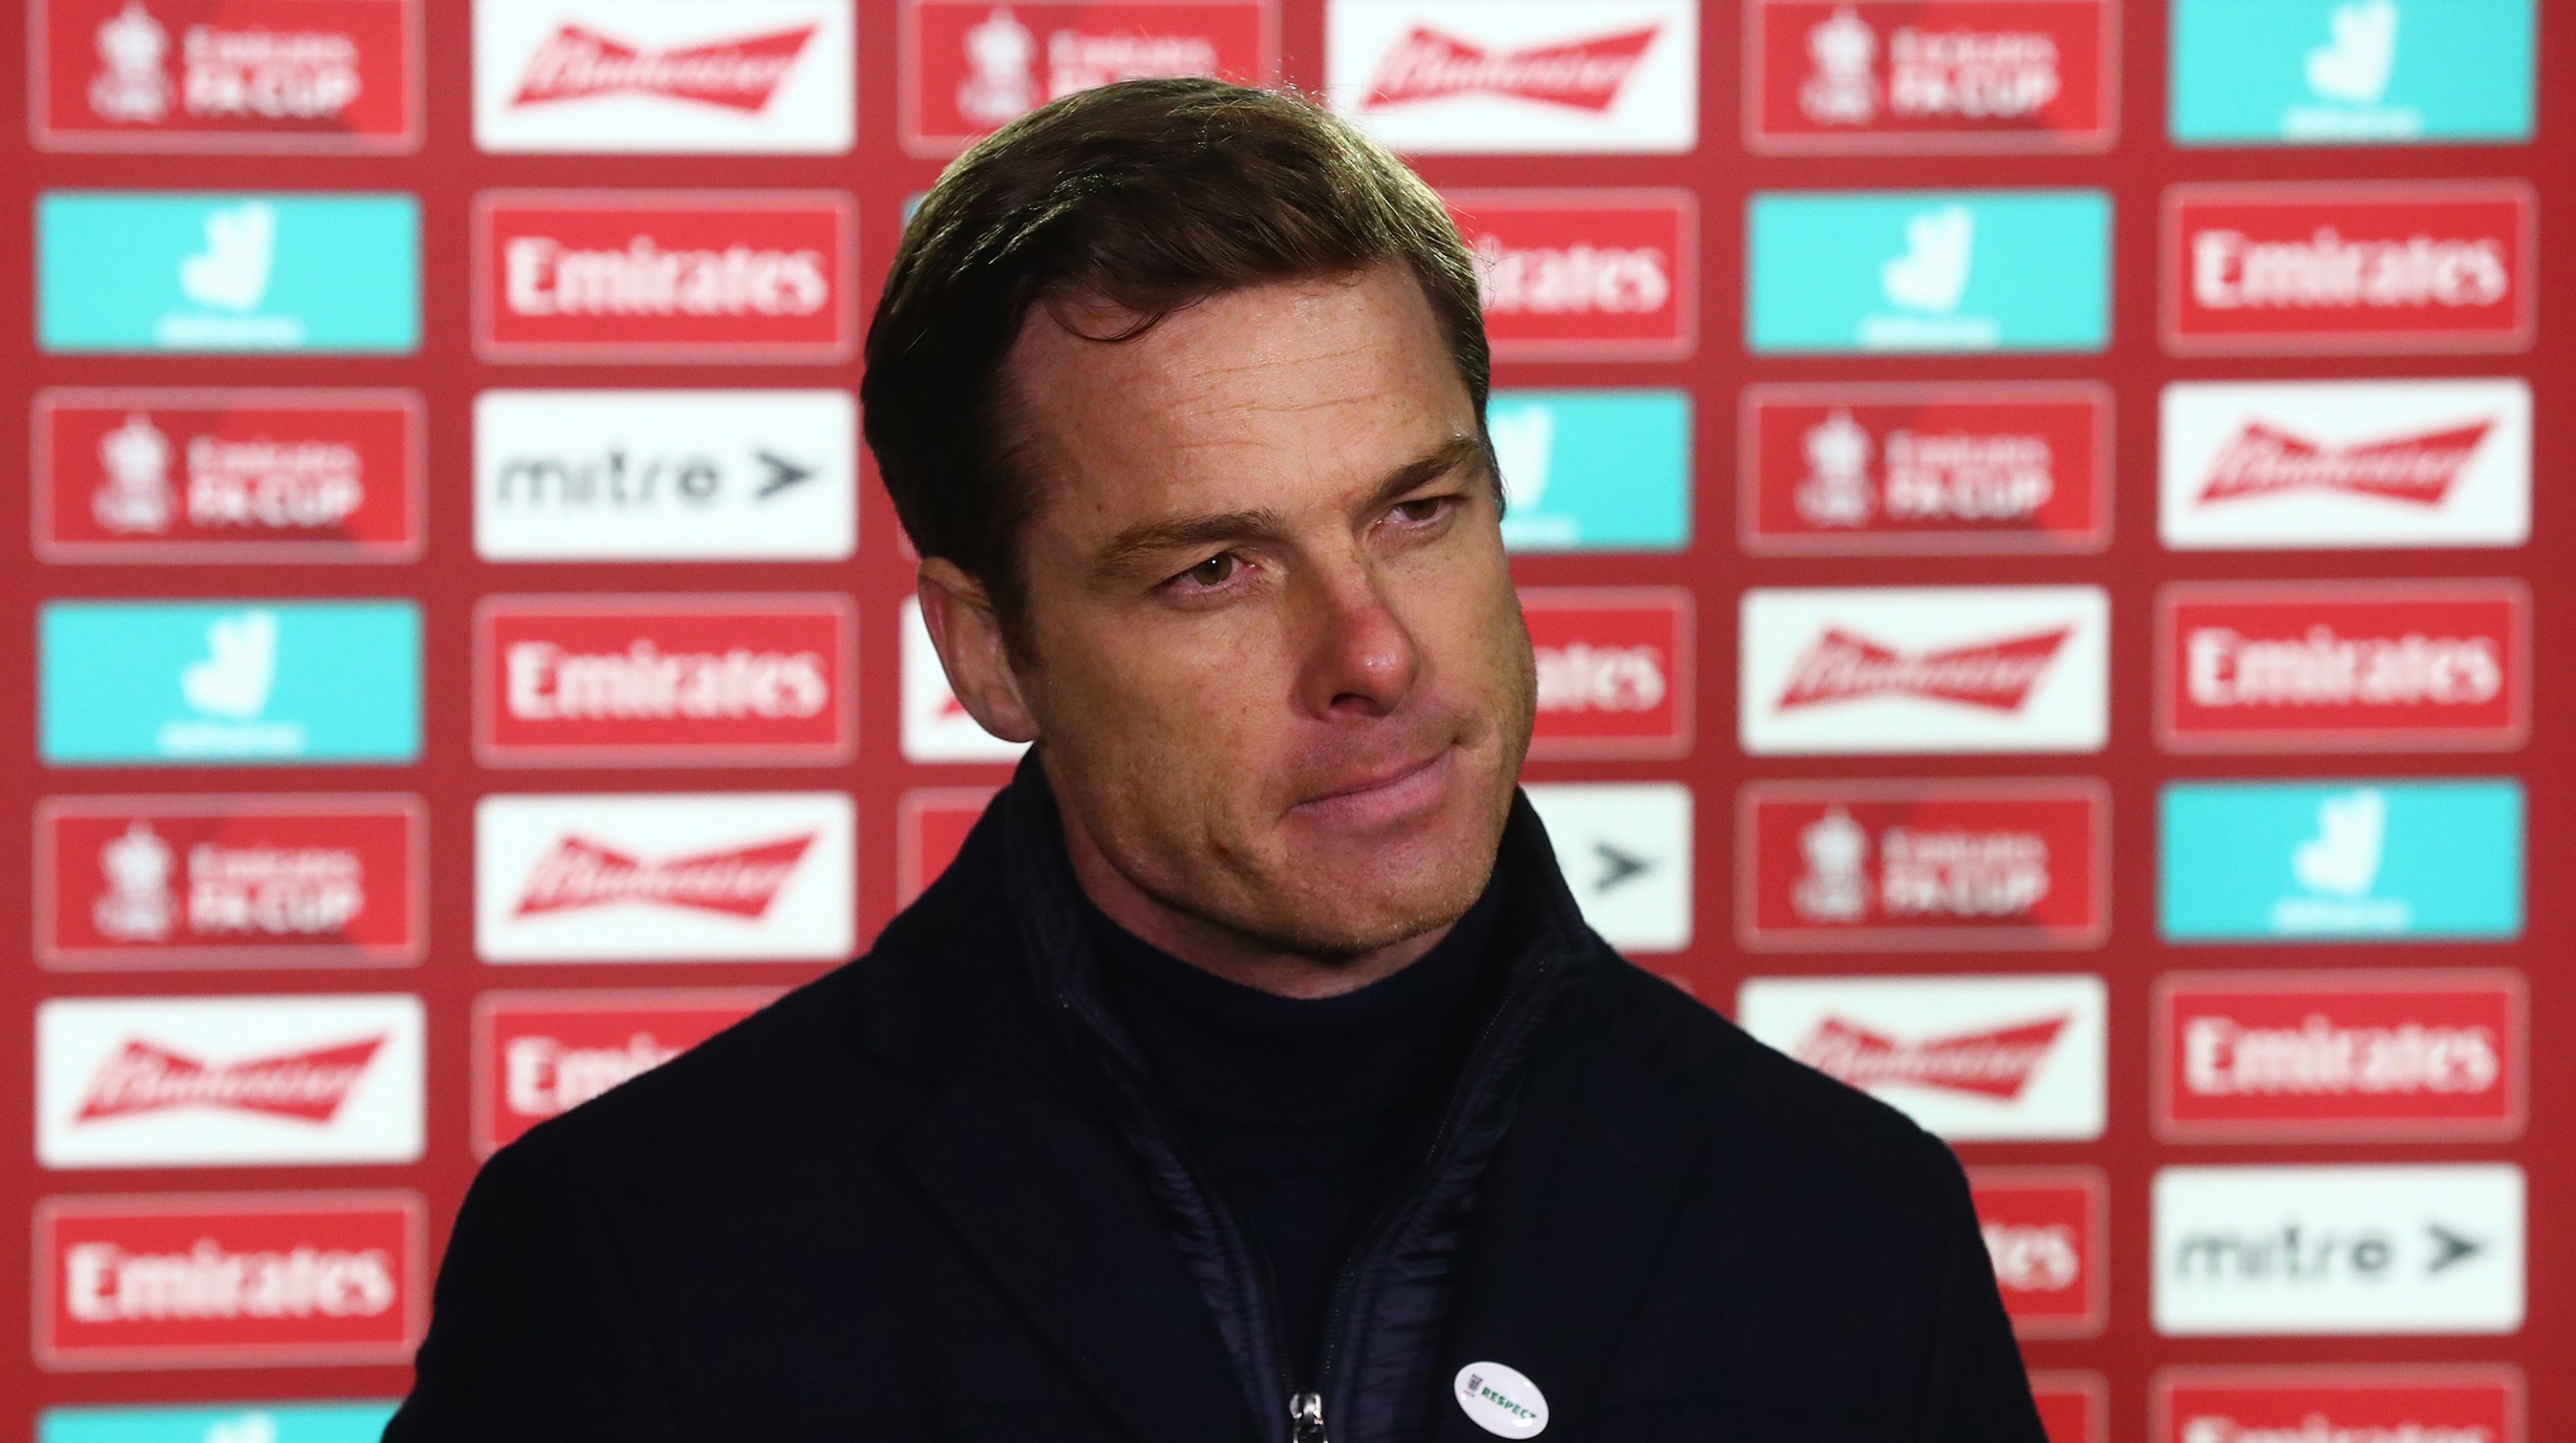 Scott Parker, Manager of Fulham is interviewed after the FA Cup Third Round match between Queens Park Rangers and Fulham at The Kiyan Prince Foundation Stadium on January 09, 2021 in London, England.